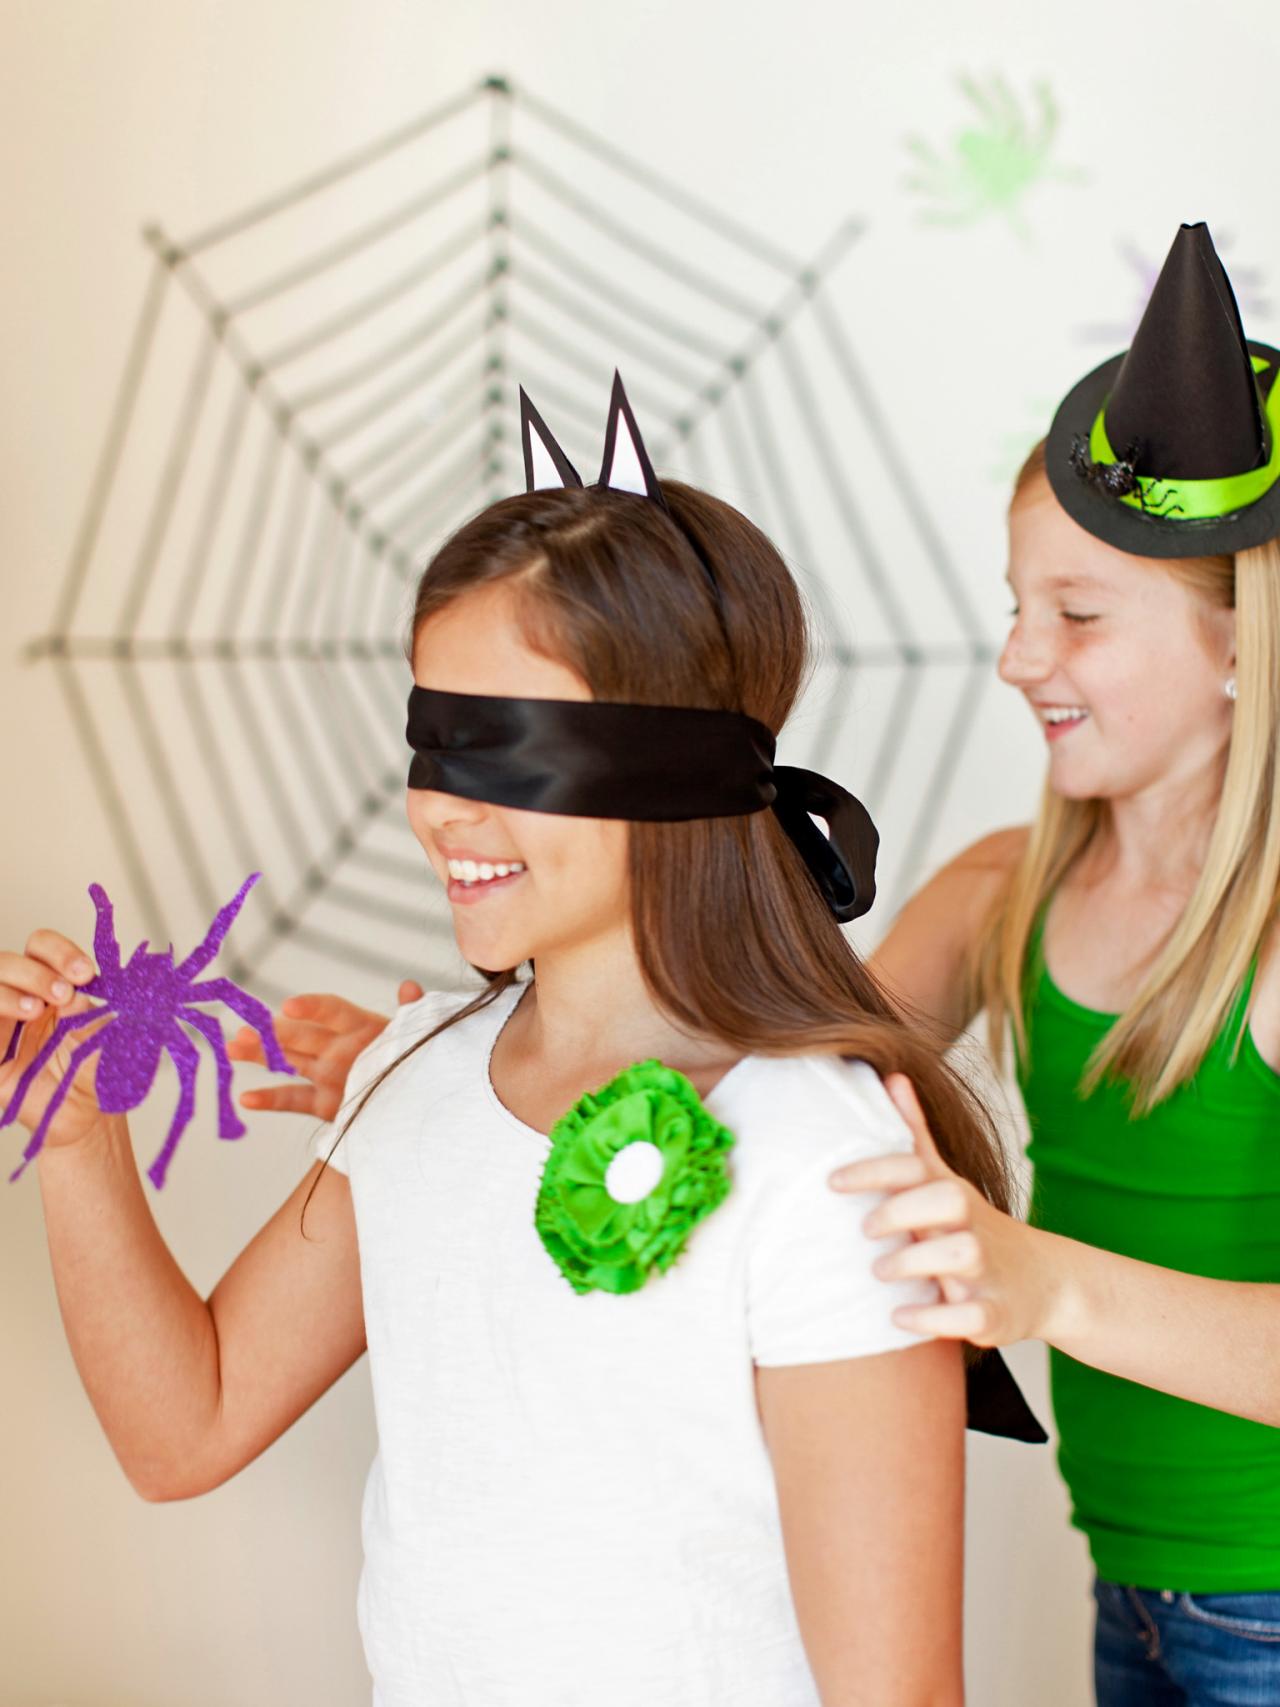 Pin The Spider On The Web Game Poster for Kids Halloween Class Party Game Activities Halloween Party Decoration Happy Halloween Birthday Party Favors Supplies WATINC Halloween Party Sticker Games 